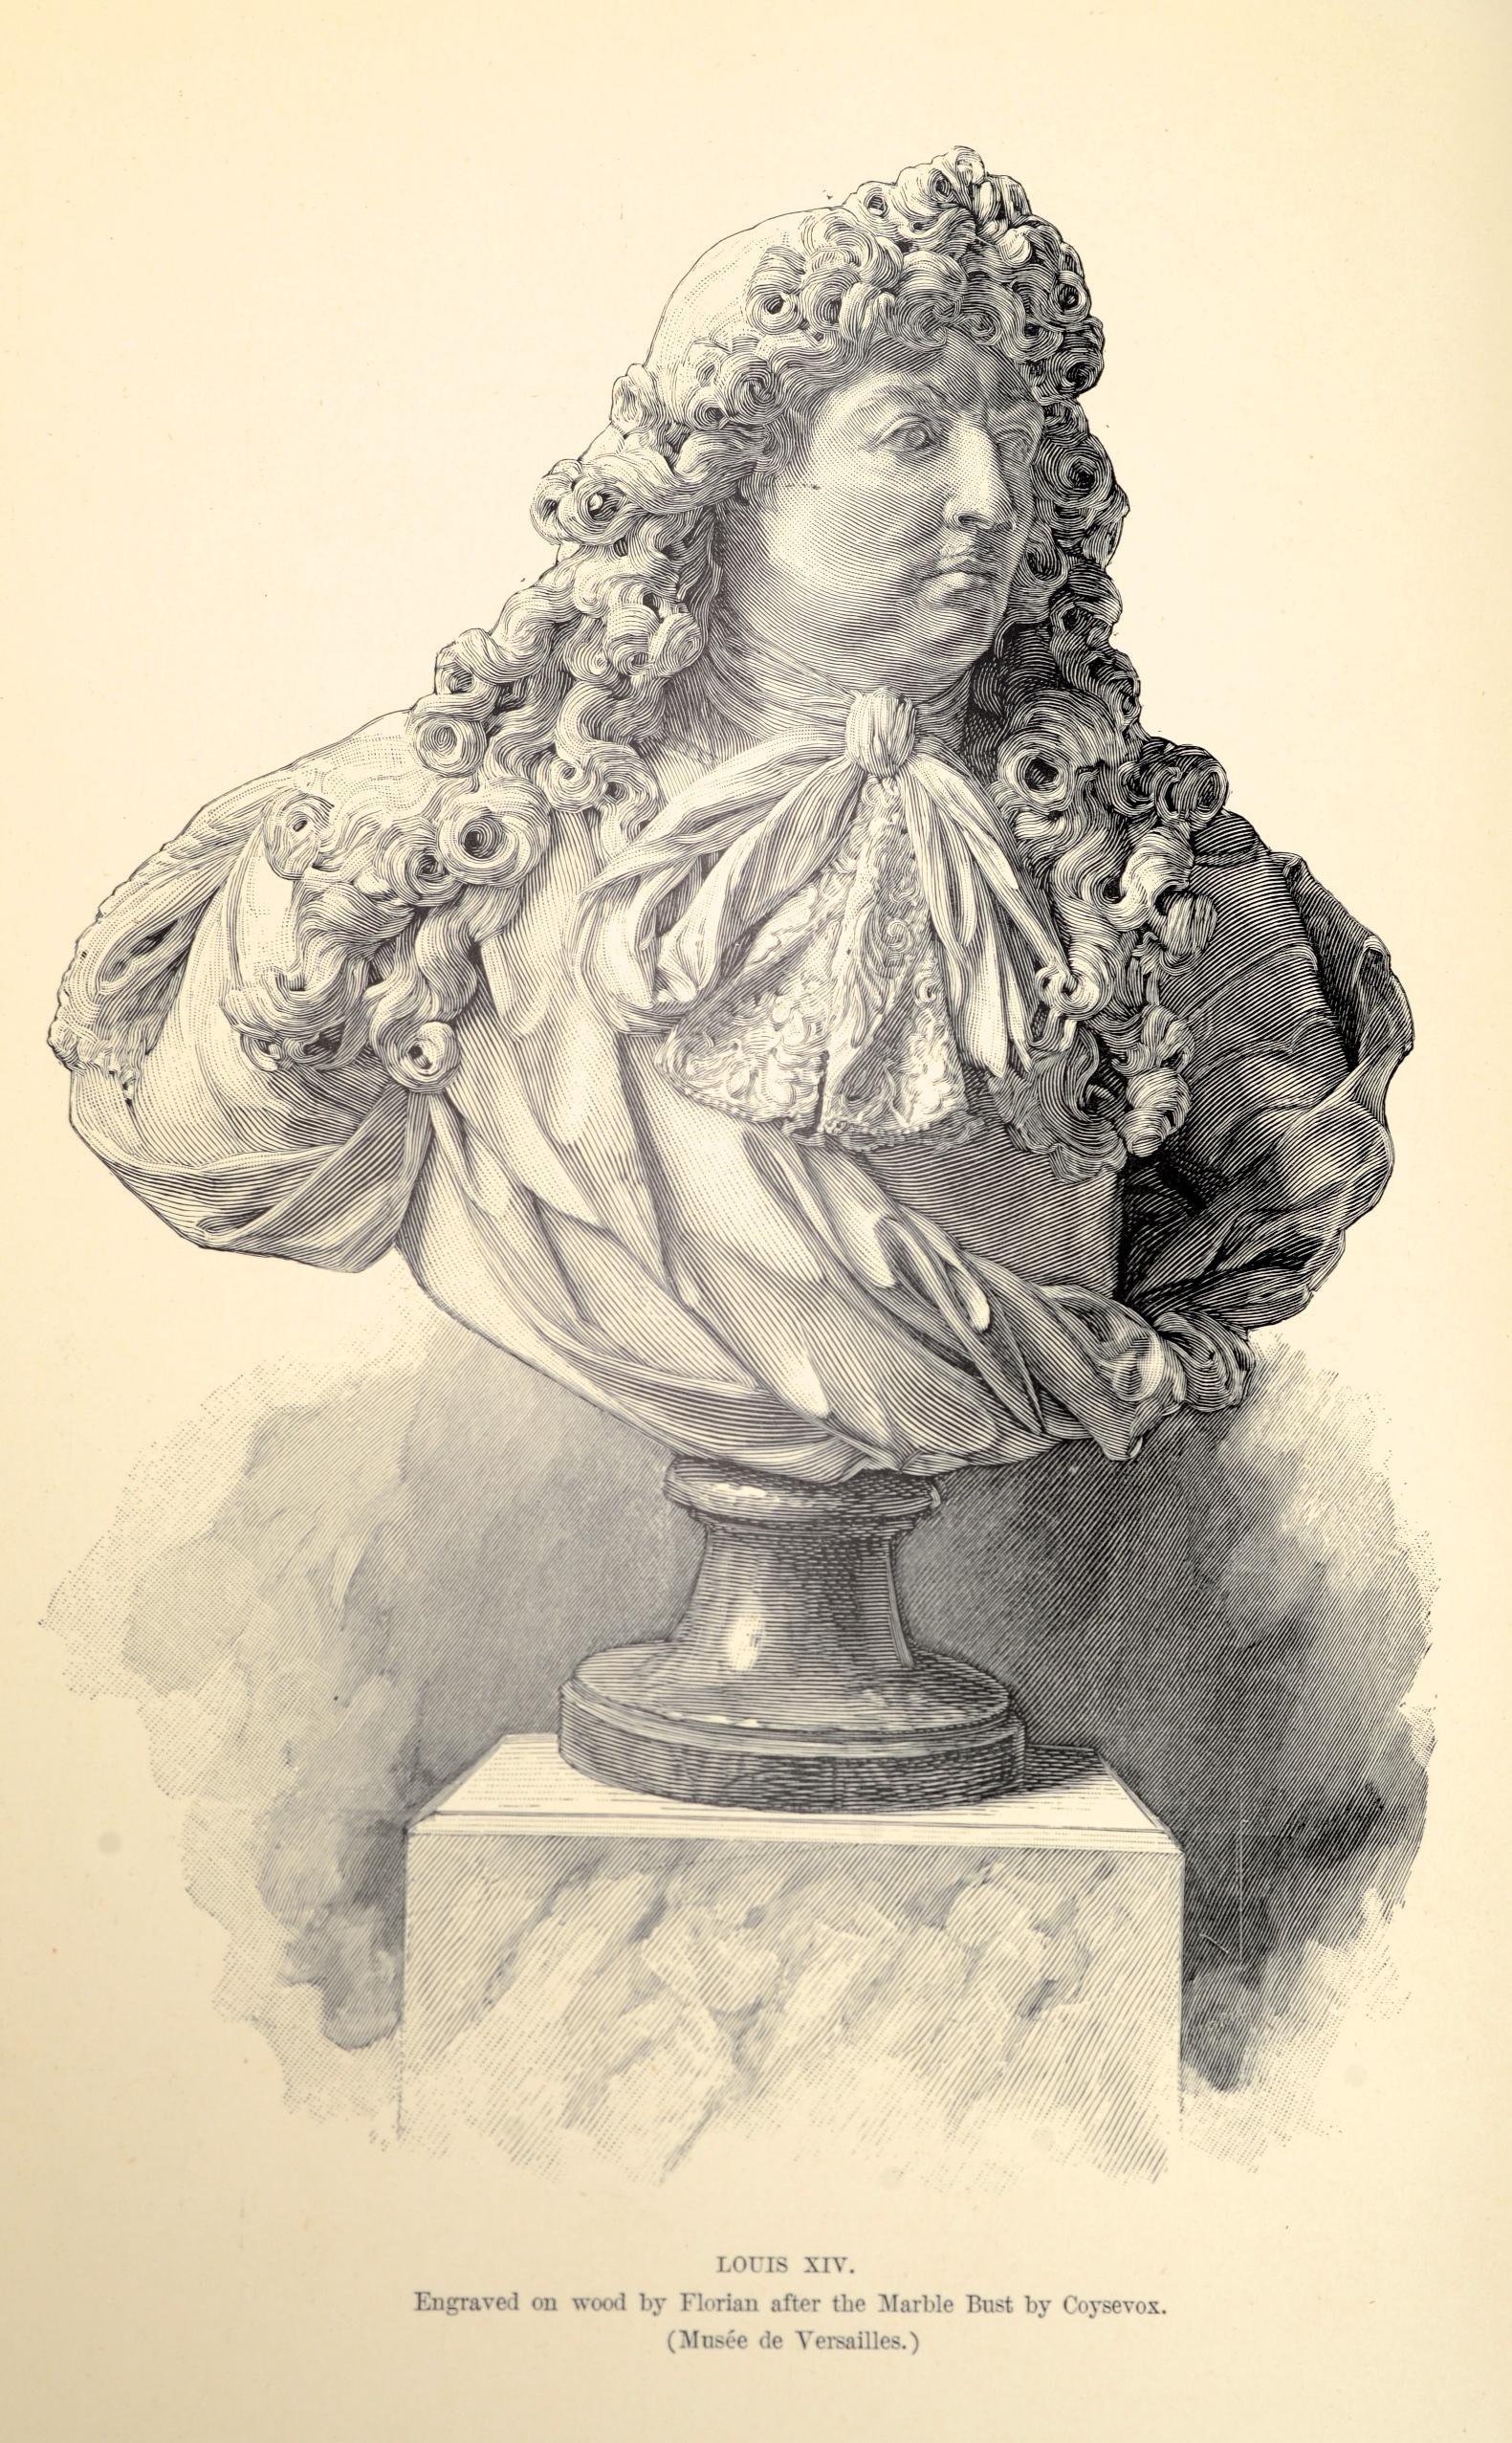 France Under Louis XIV [Le Grand Siecle], Its Arts, Its Ideas by Mrs. Cashel Huey. Charles Scribner's Sons, New York, 1897. First Edition hardcover. 470 pp. With 34 copper engravings and numerous other b&w plates. The book attempts to unravel the